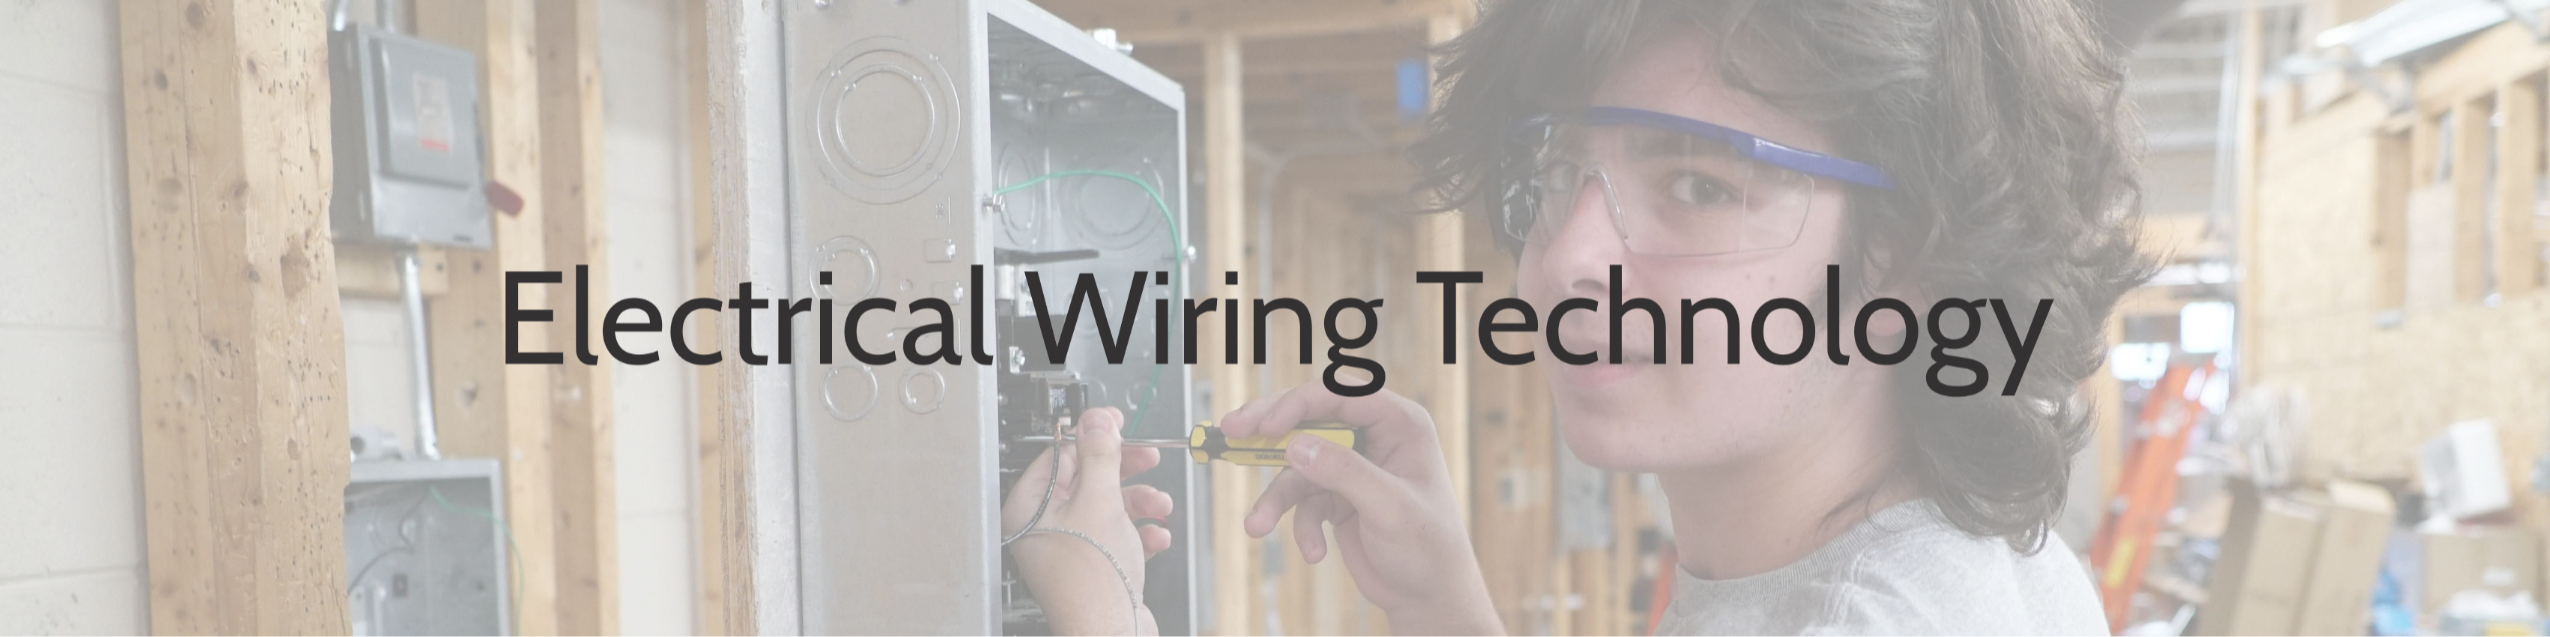 Electrical Wiring Technology